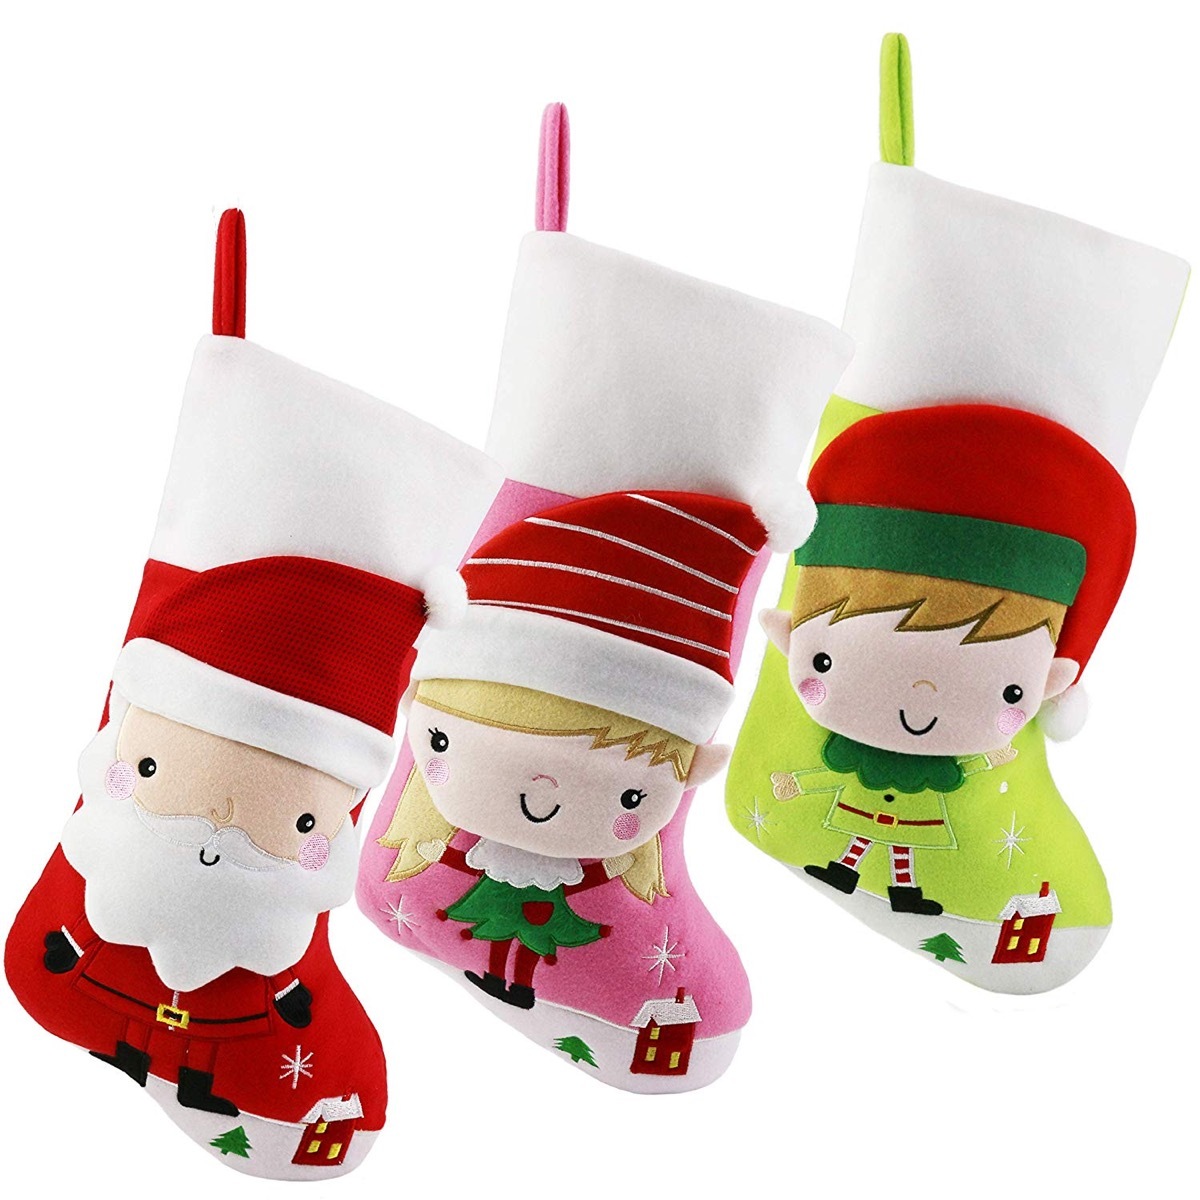 white stockings with santa and cartoon elves on them